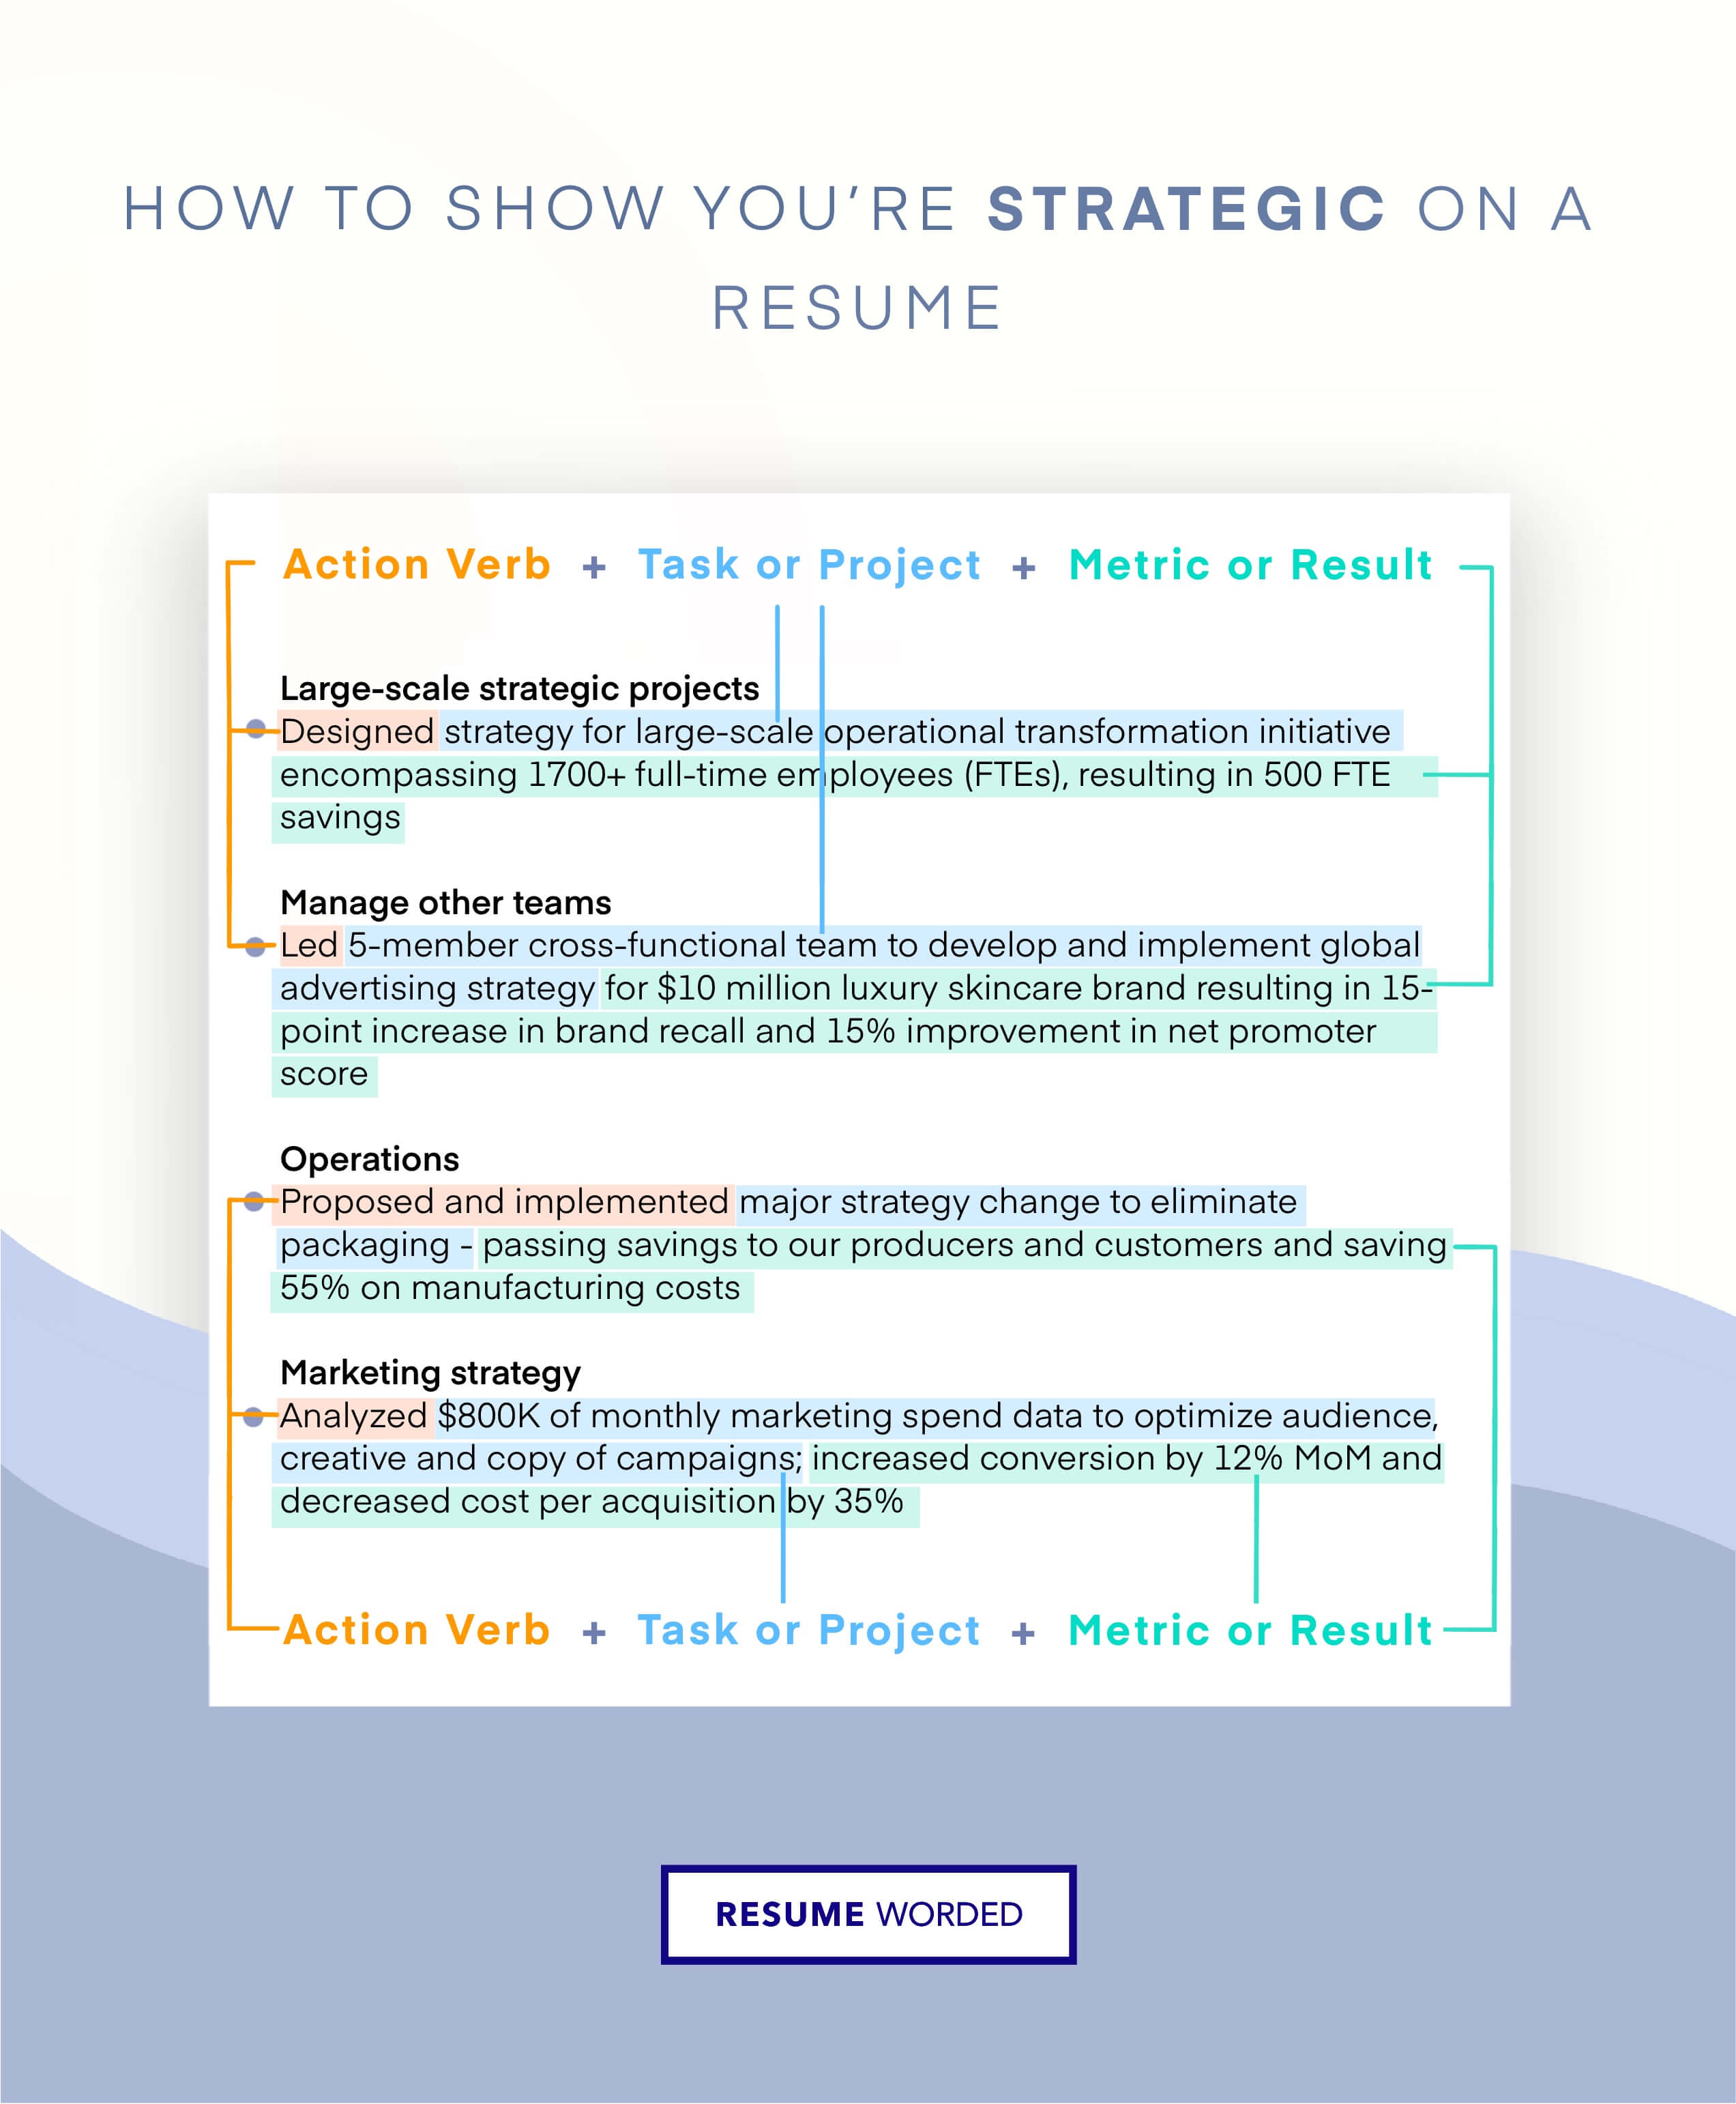 Emphasize your strategic thinking - Director of Information Technology CV